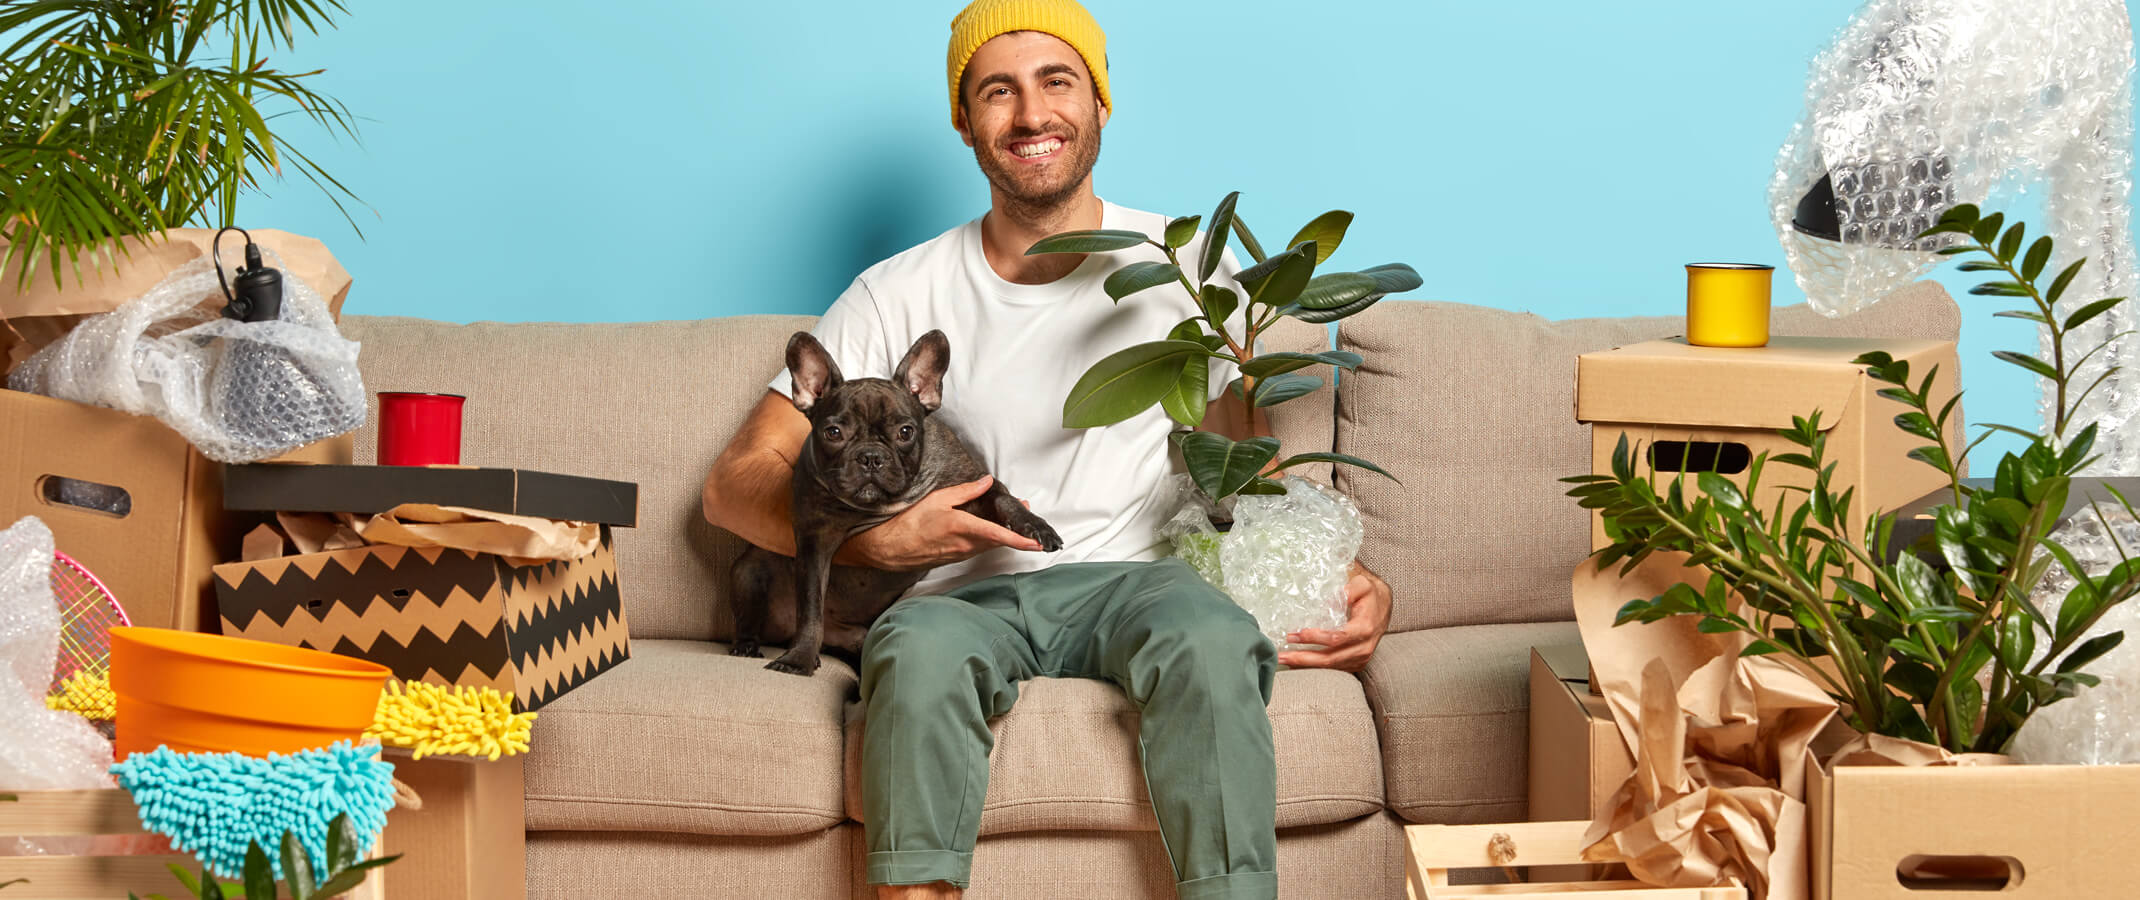 Man sitting on his couch with dog in one hand and rubber tree plant in the other smiling while in the midst of his things all still in a packed up state